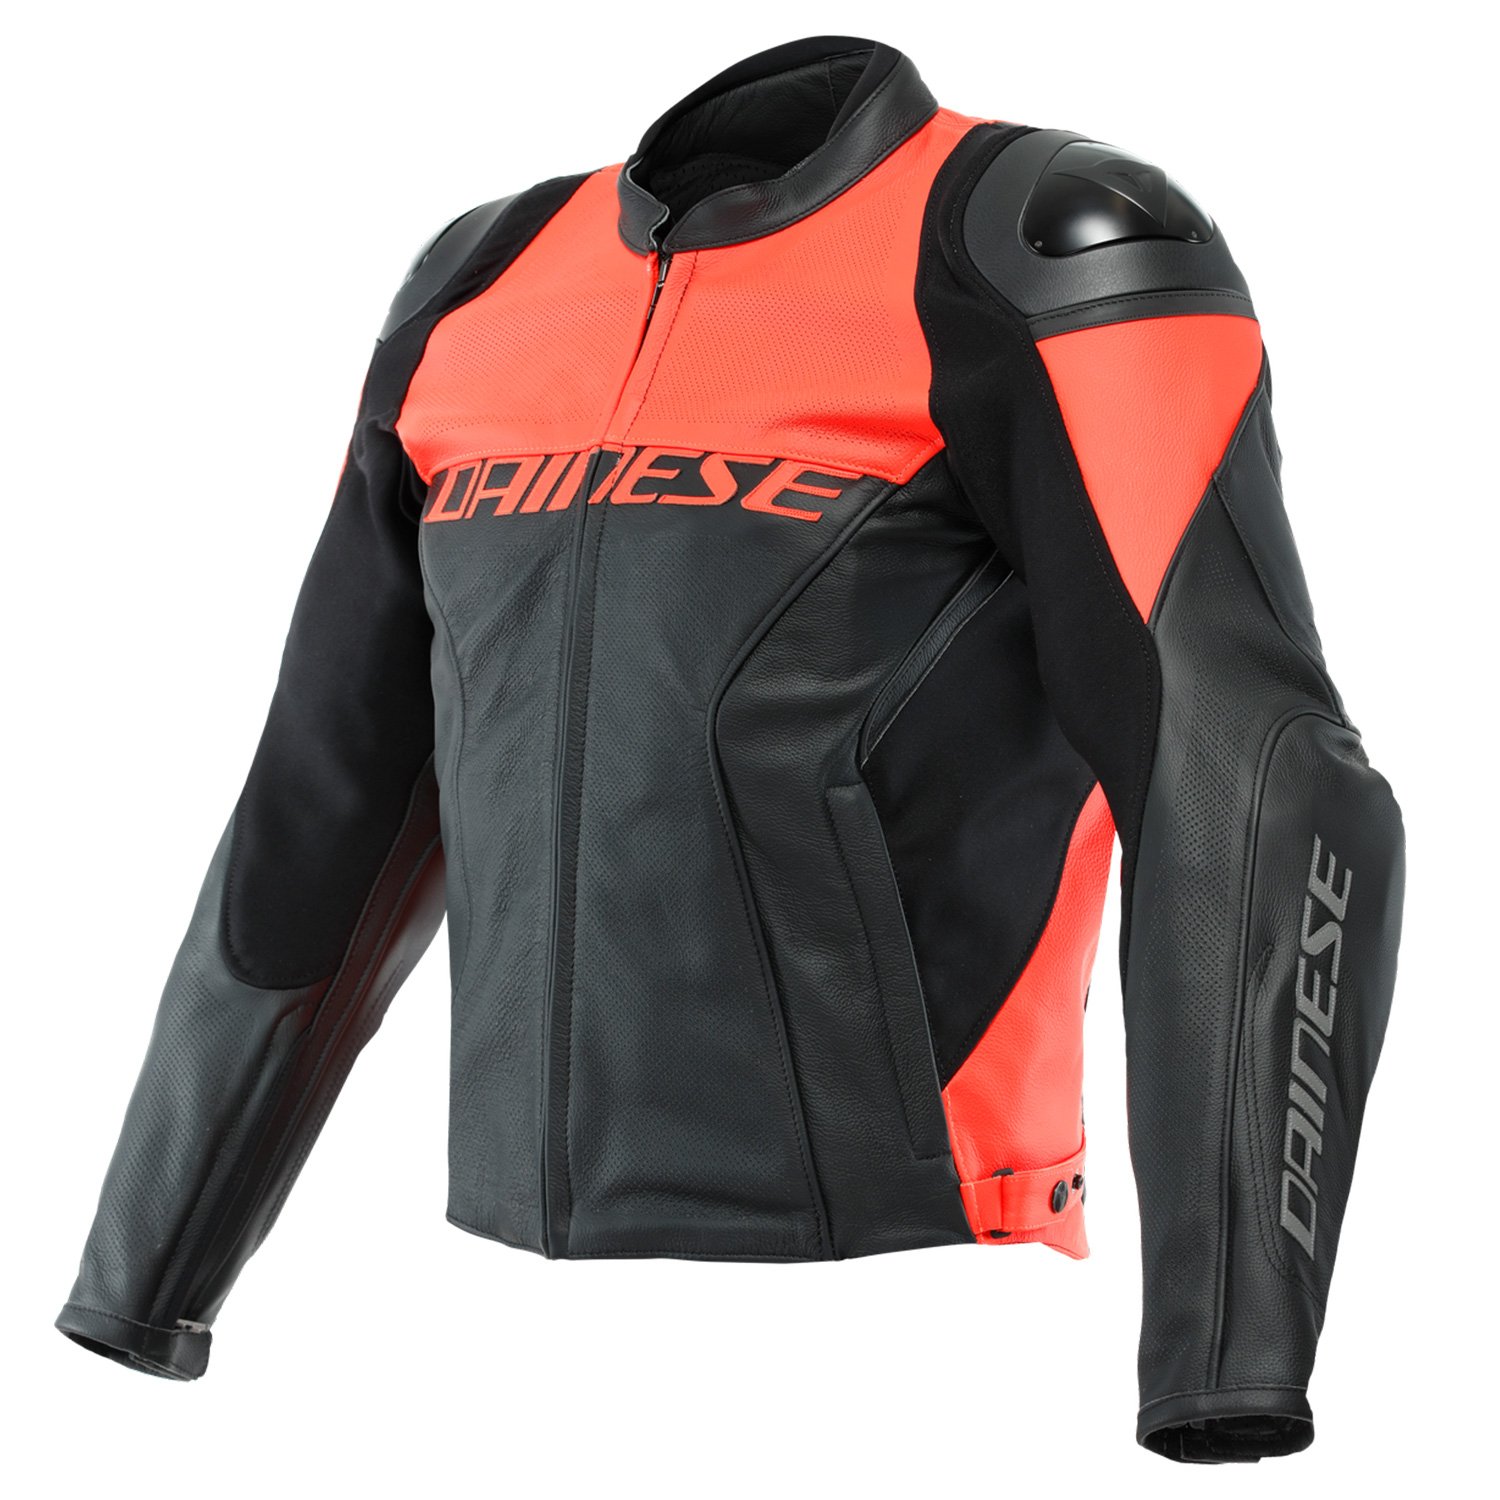 Image of Dainese Racing 4 Perforated Leather Schwarz Fluo Rot Jacke Größe 52